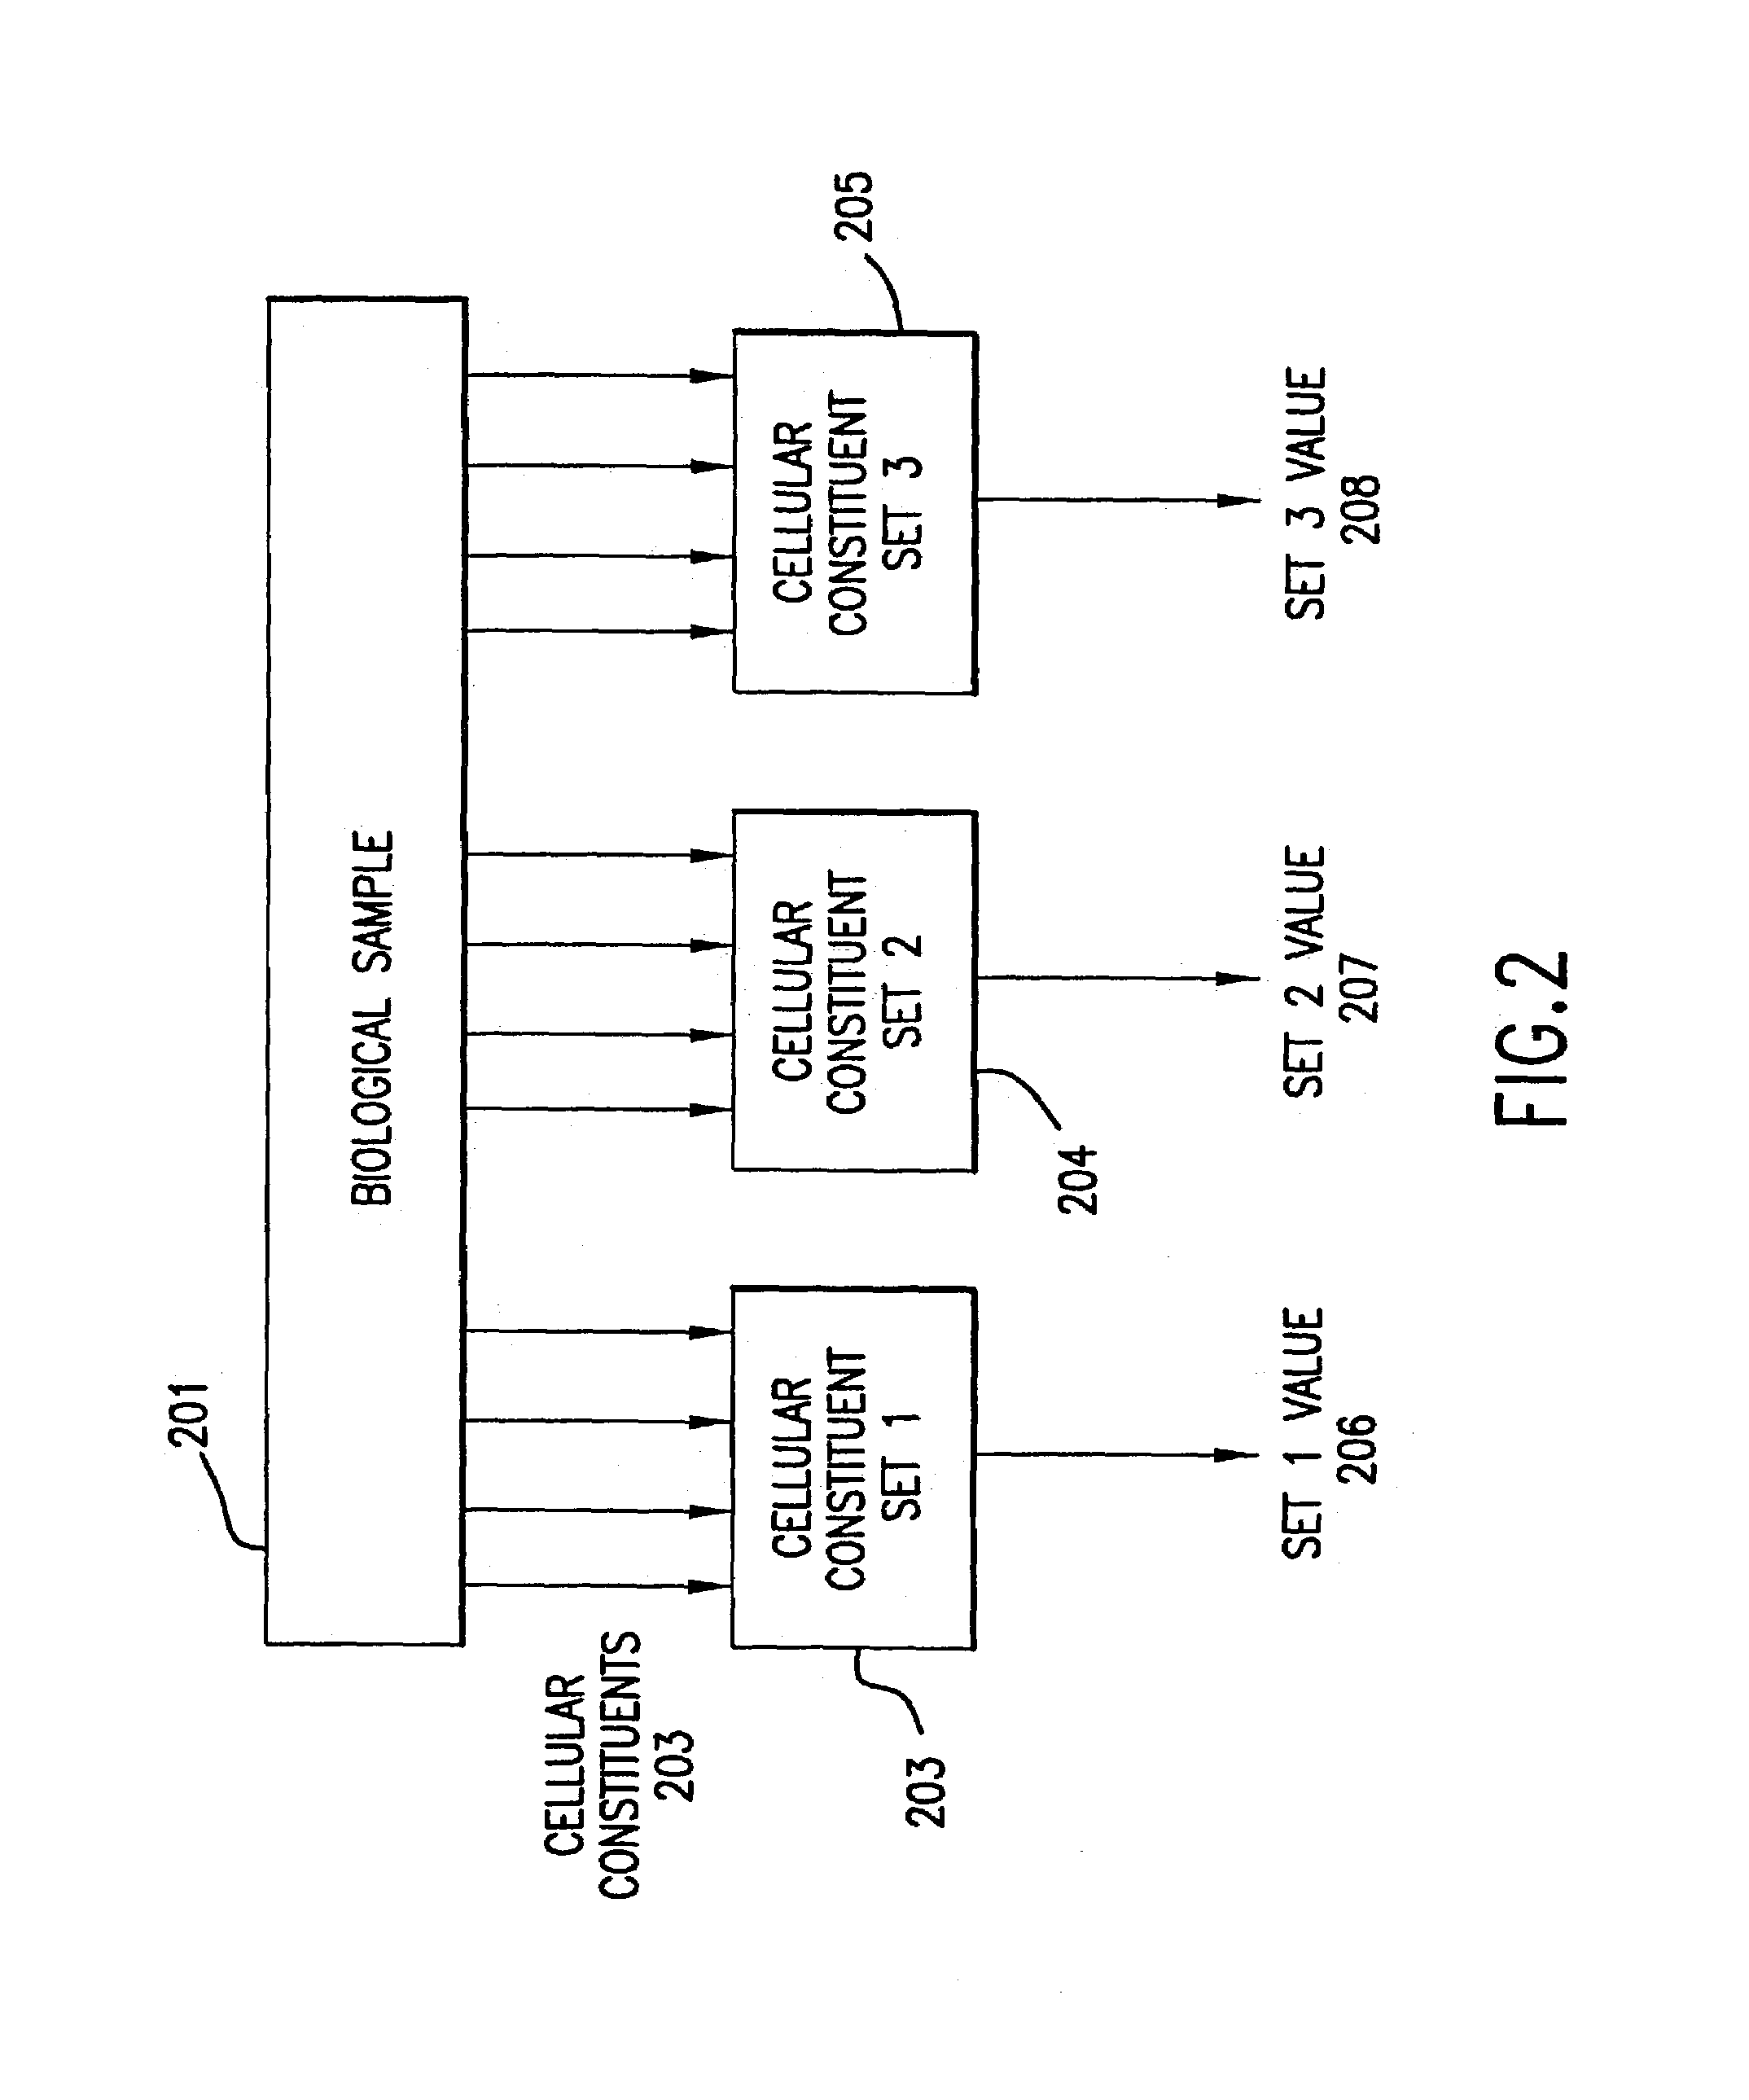 Methods for using co-regulated genesets to enhance detection and classification of gene expression patterns